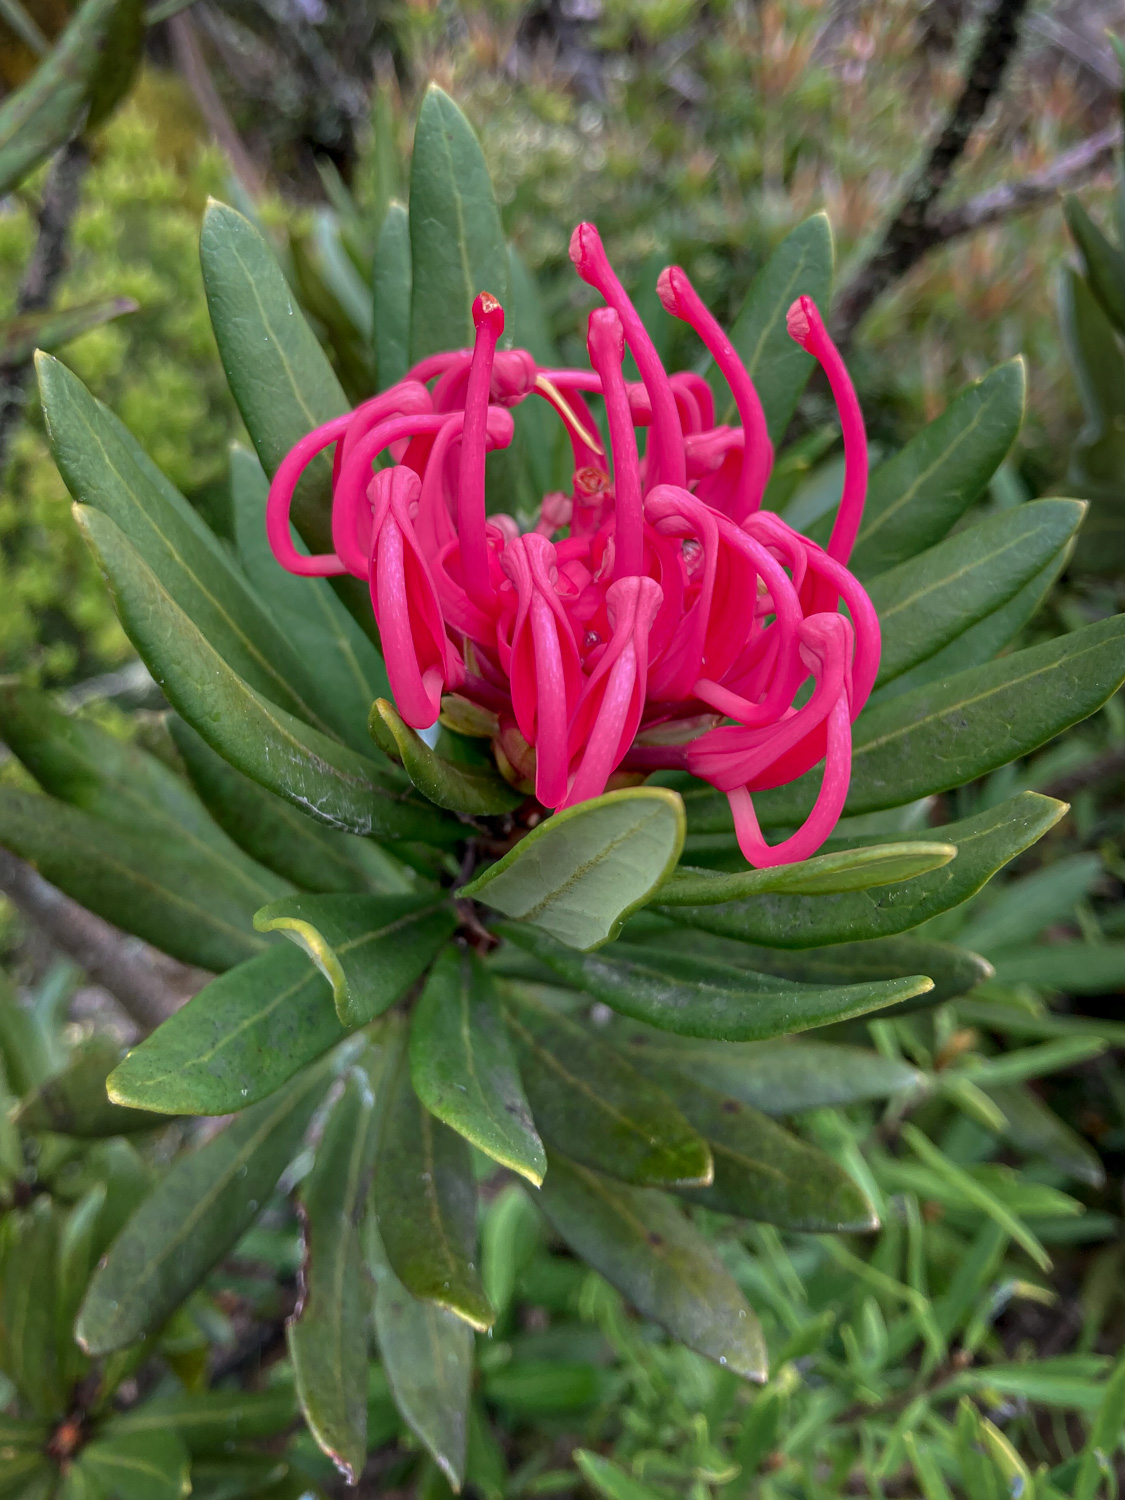 A pinkish-red flower with long fronds emerging from a bed of long green leaves